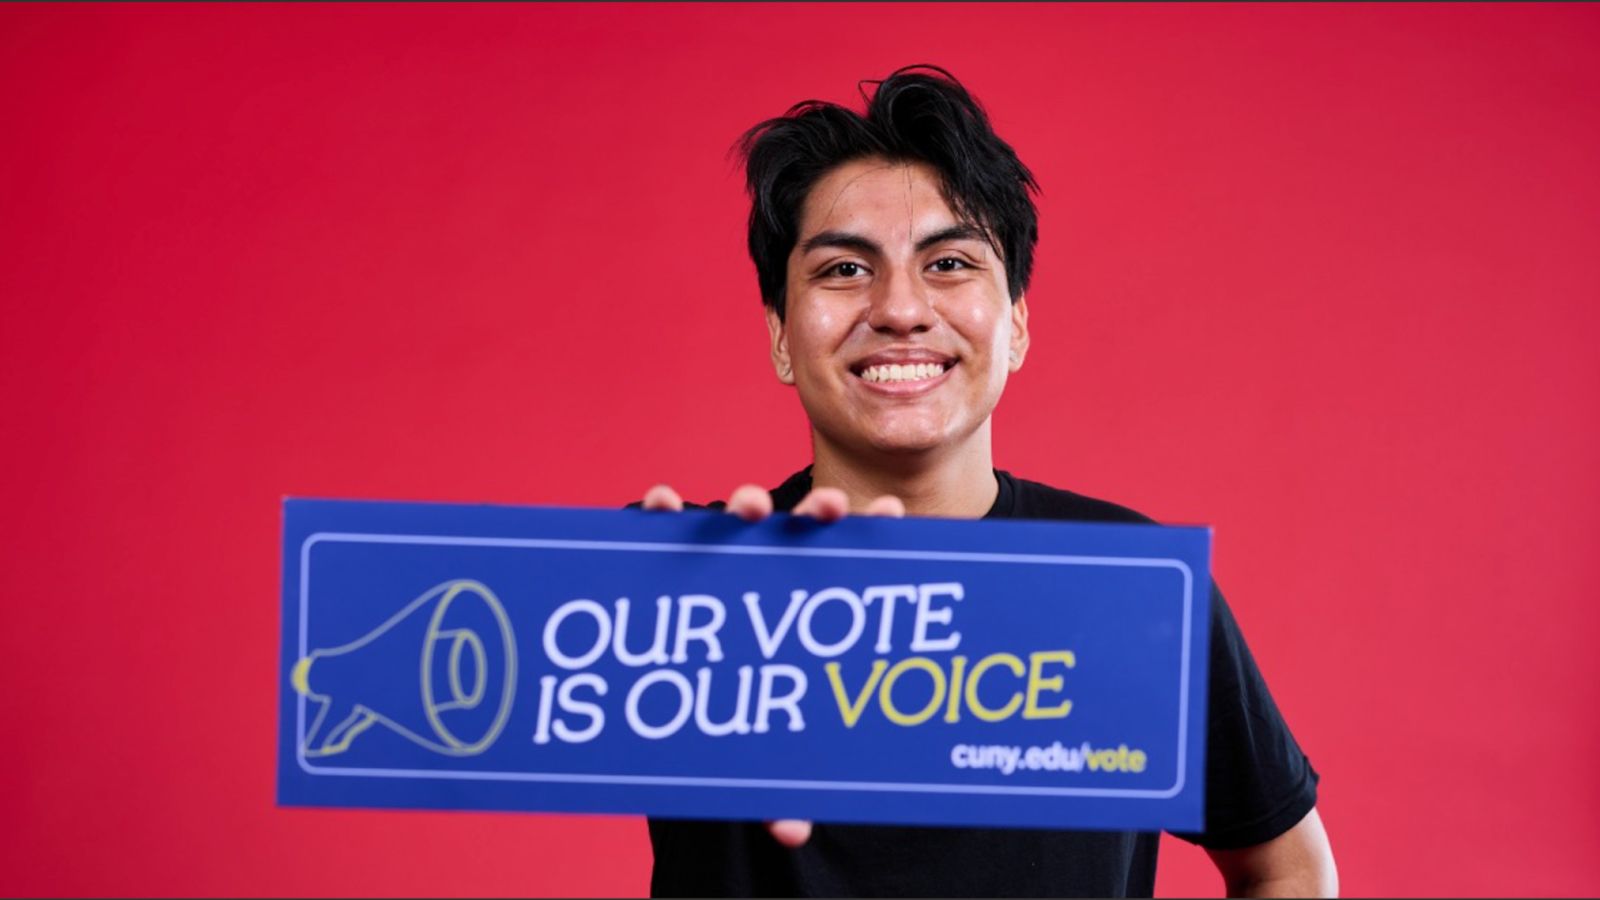 A person holds a sign saying “Our vote is our voice.”